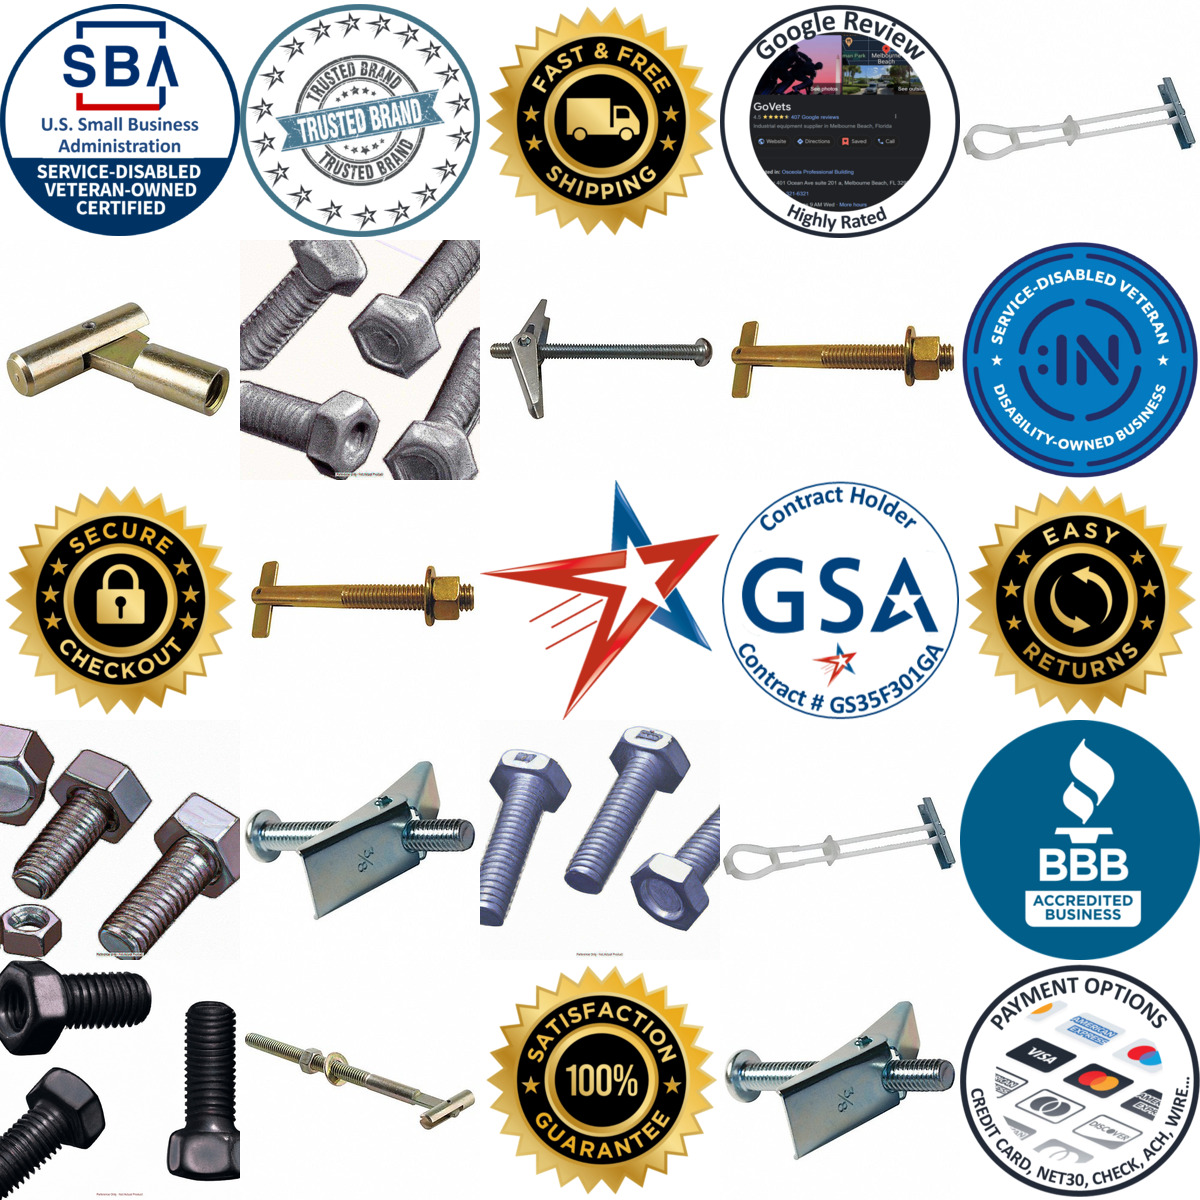 A selection of Toggle Bolts products on GoVets